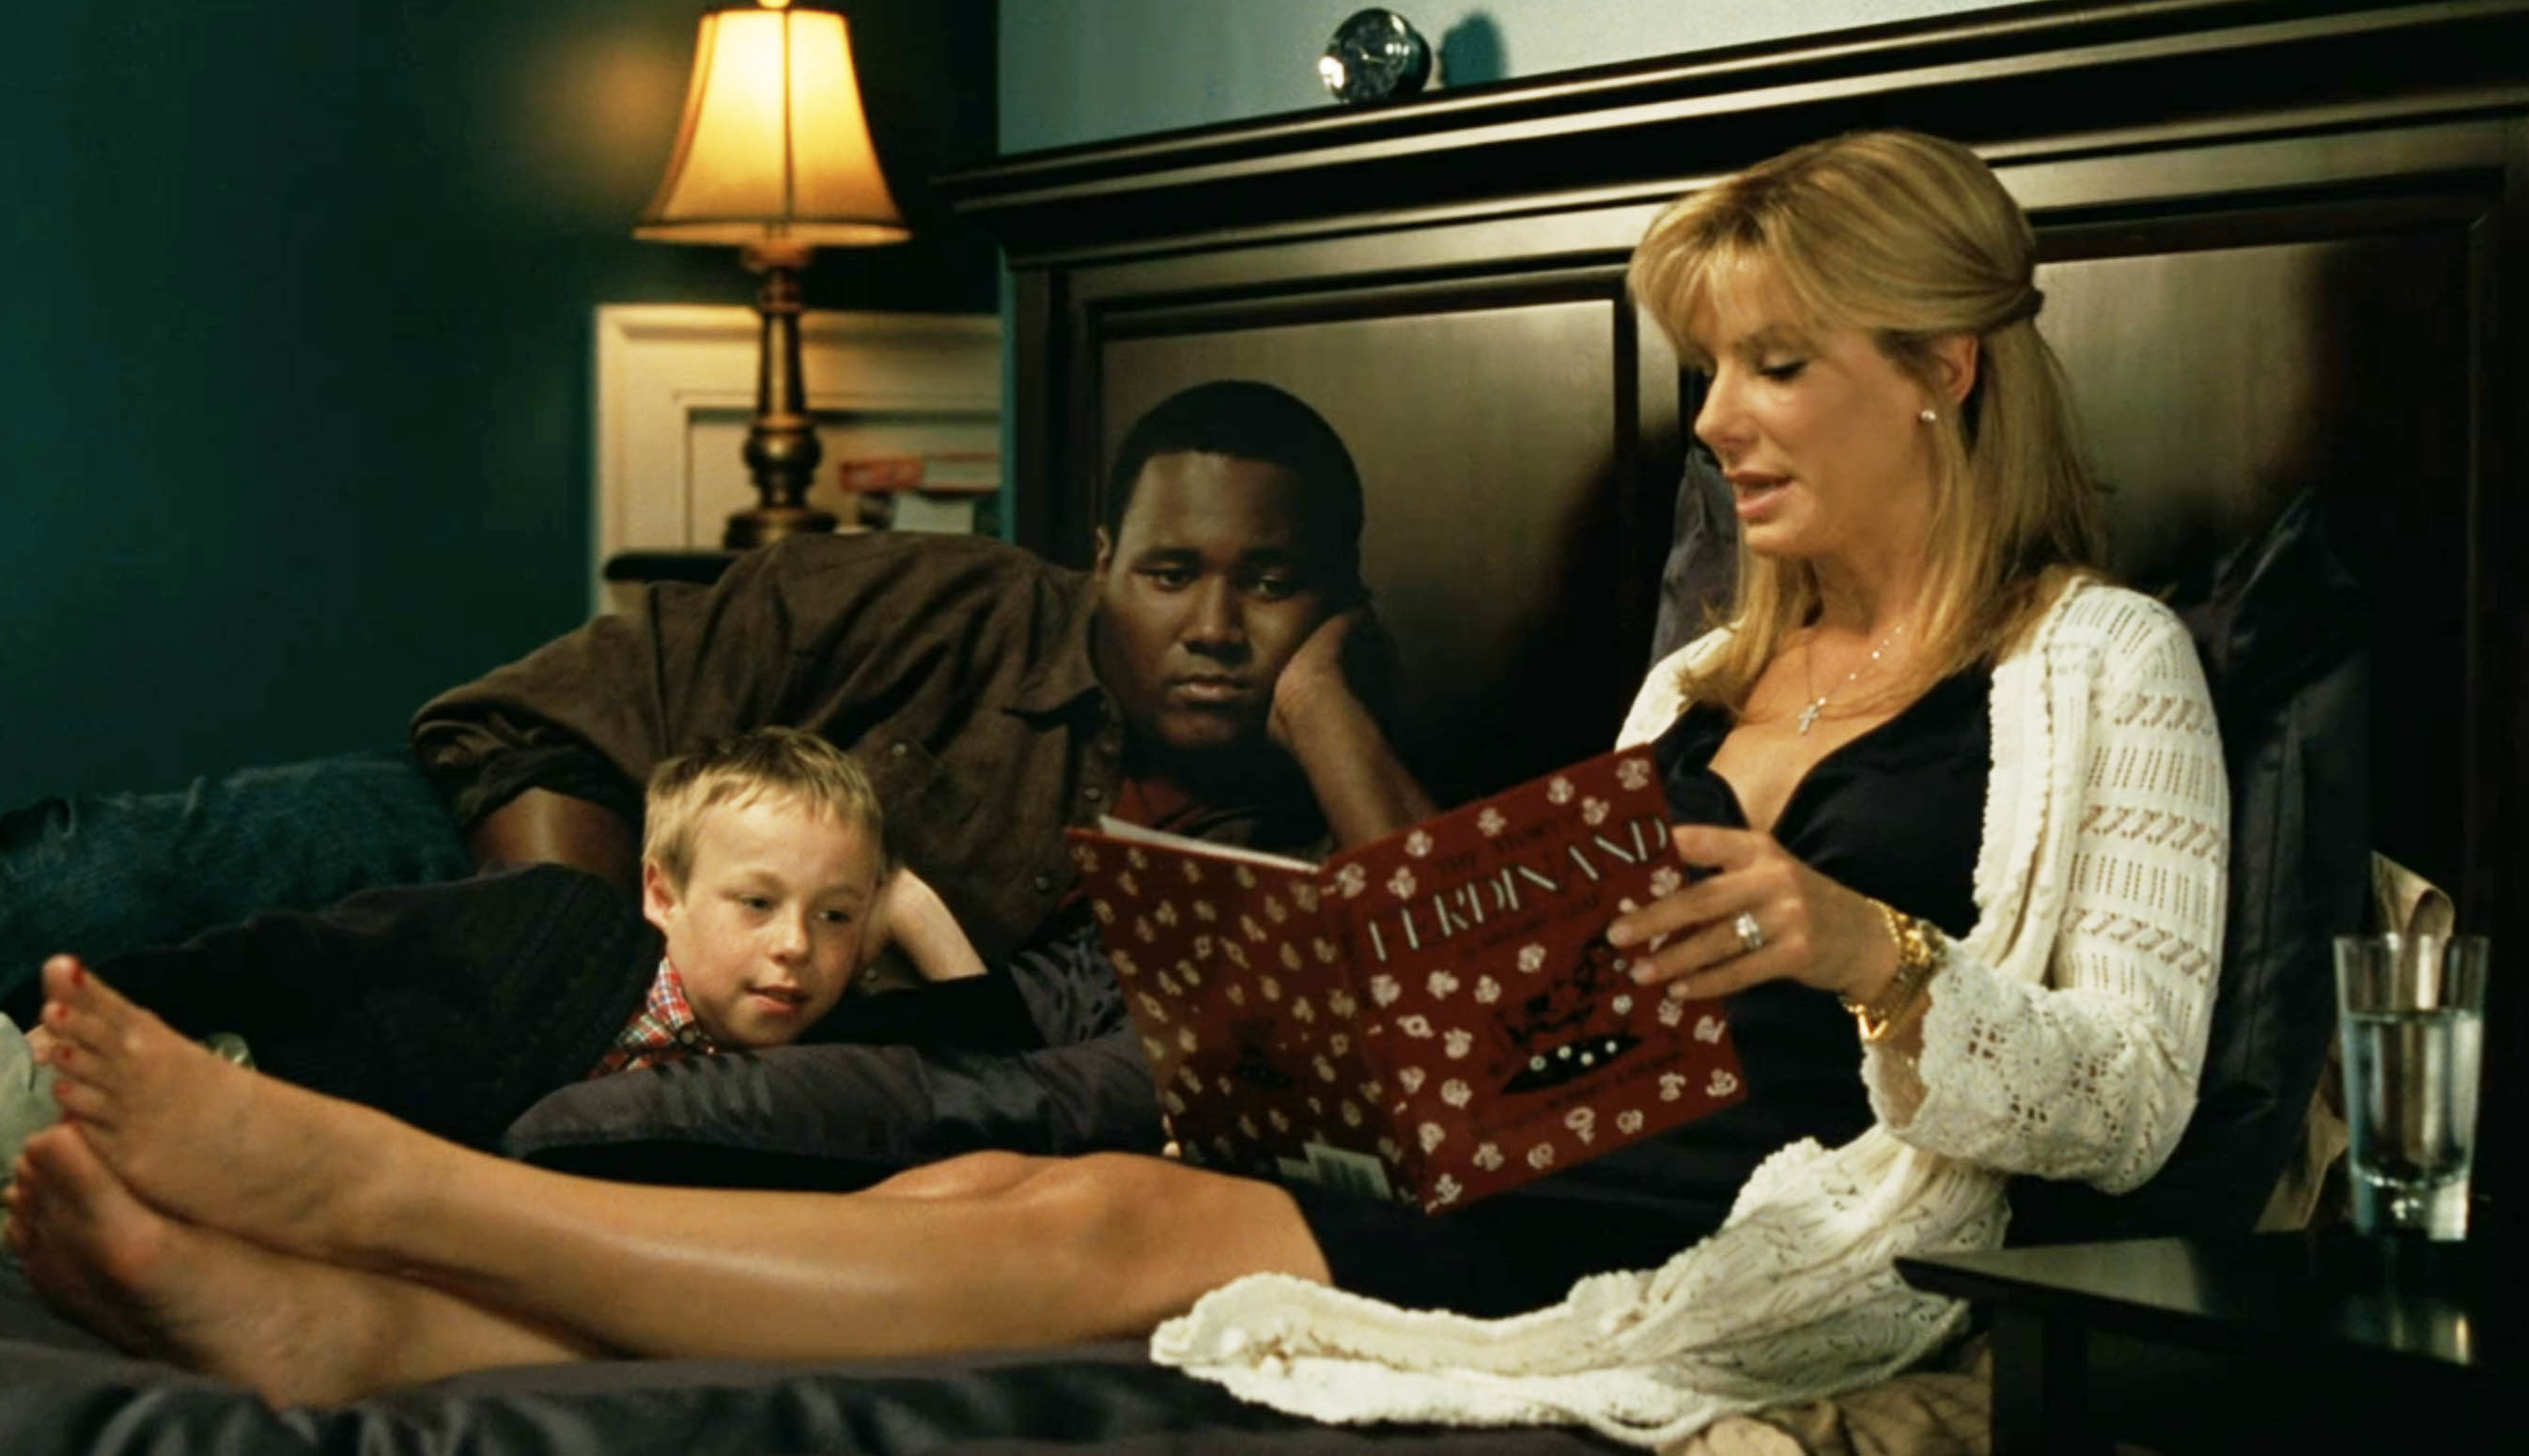 Michael Oher laying in bed as Leigh Anne Tuohy reads to him and her son in a scene from the film